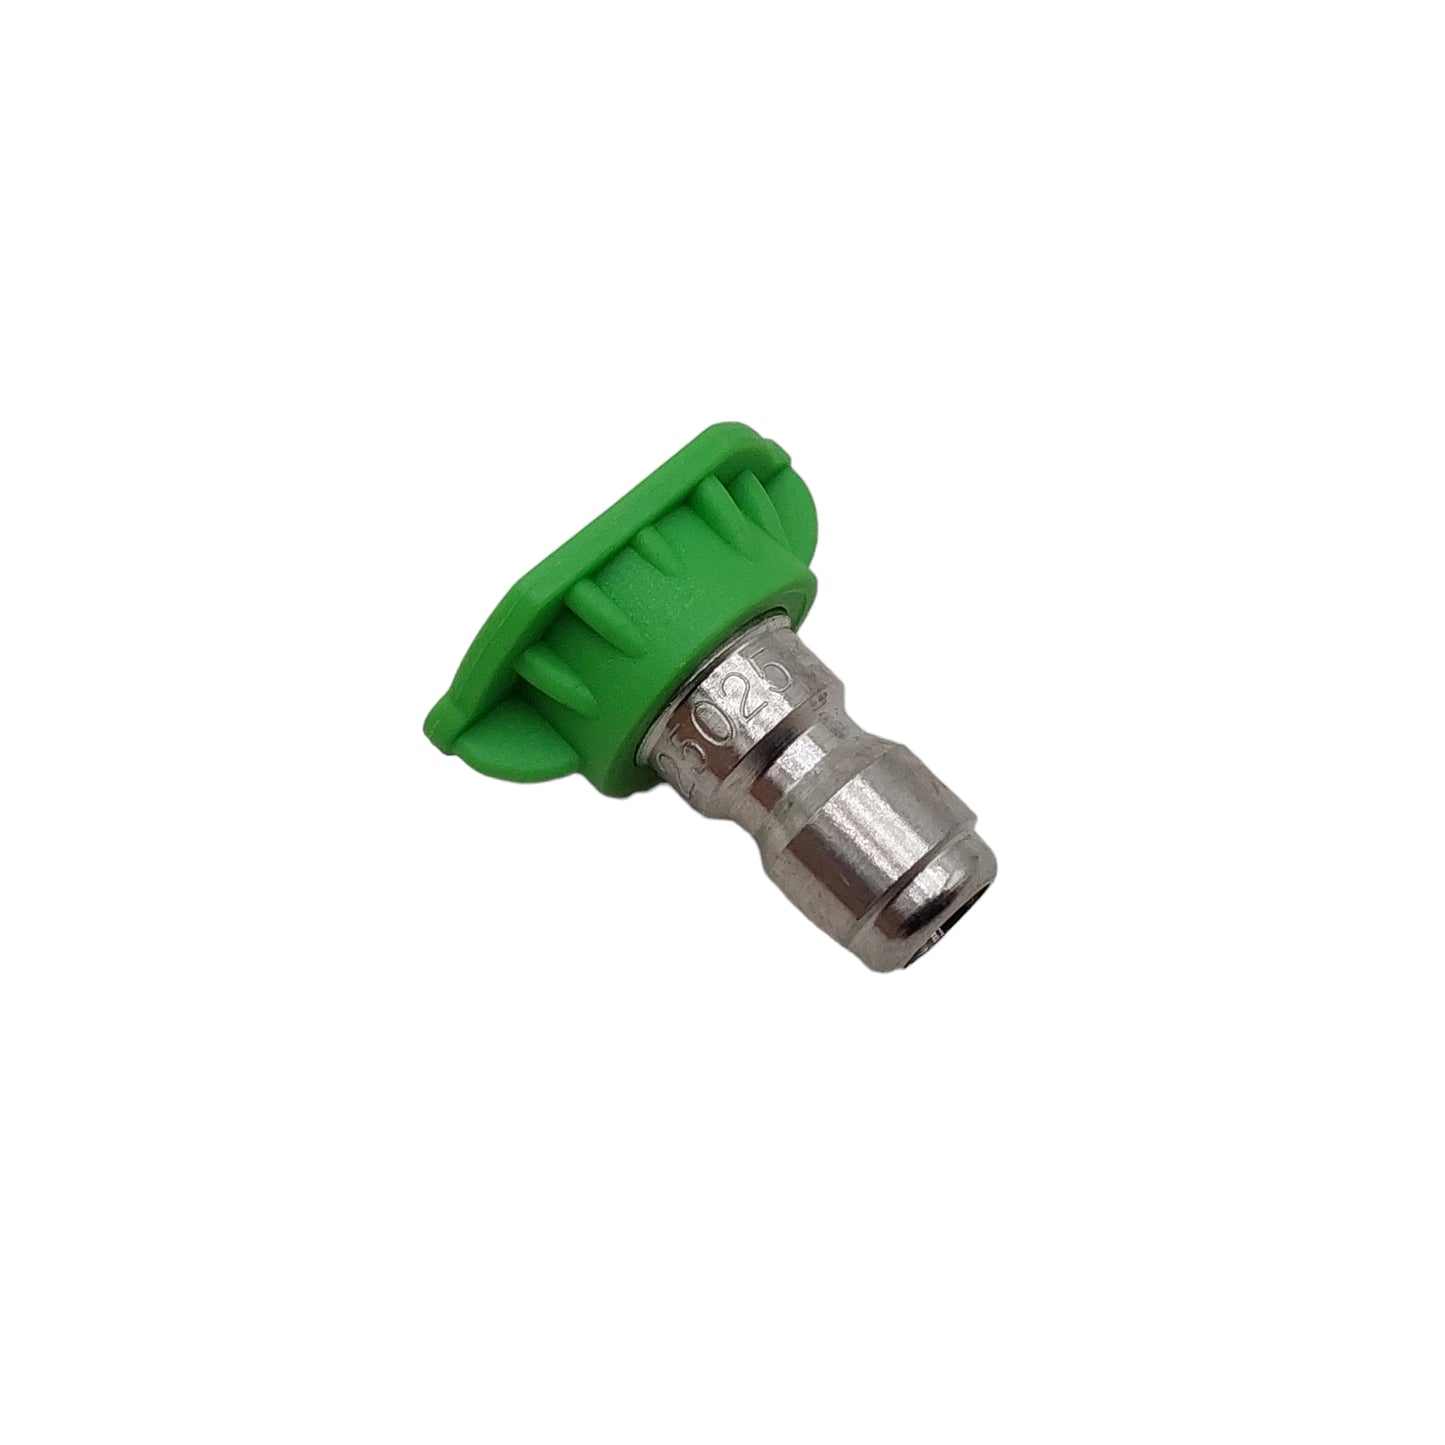 Proven Part Pressure Washer Tip 3.0 Green 25 Degree